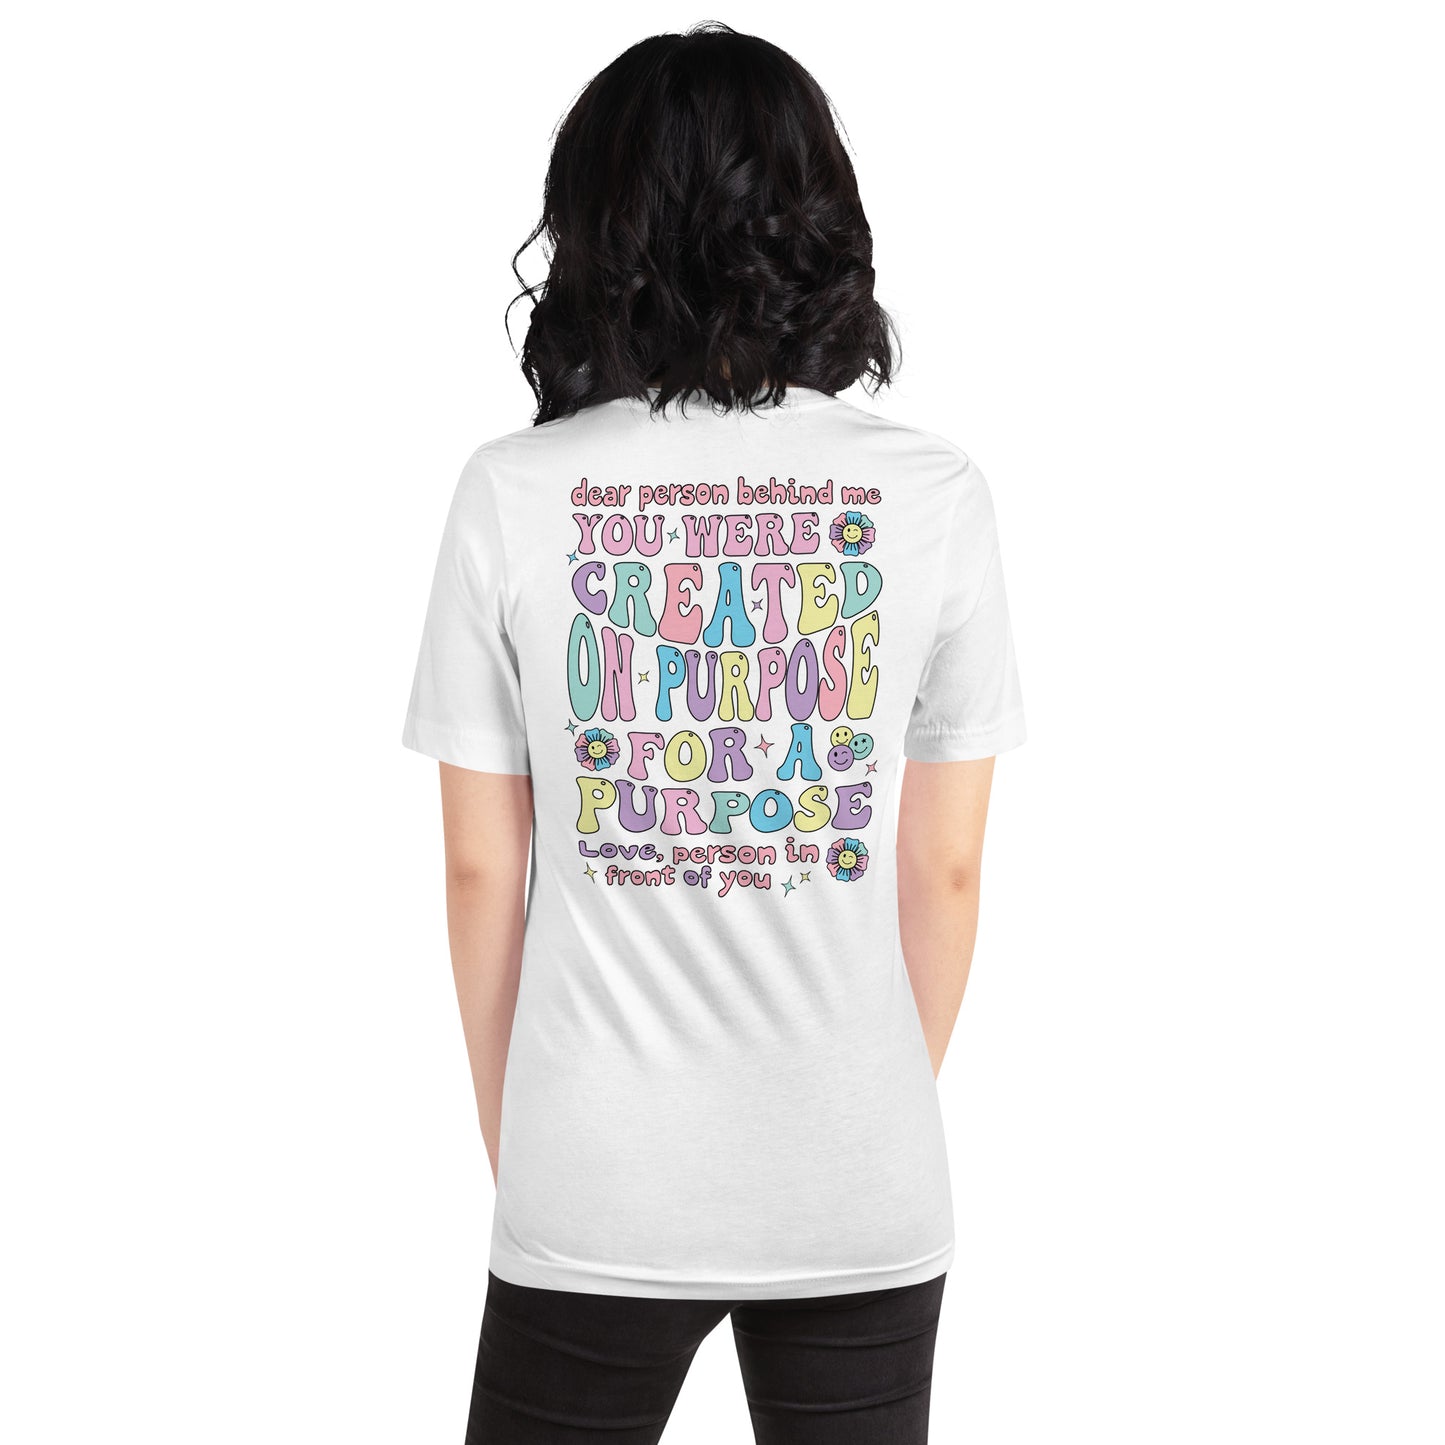 Dear Person Behind Me You Were Created On Purpose Unisex t-shirt